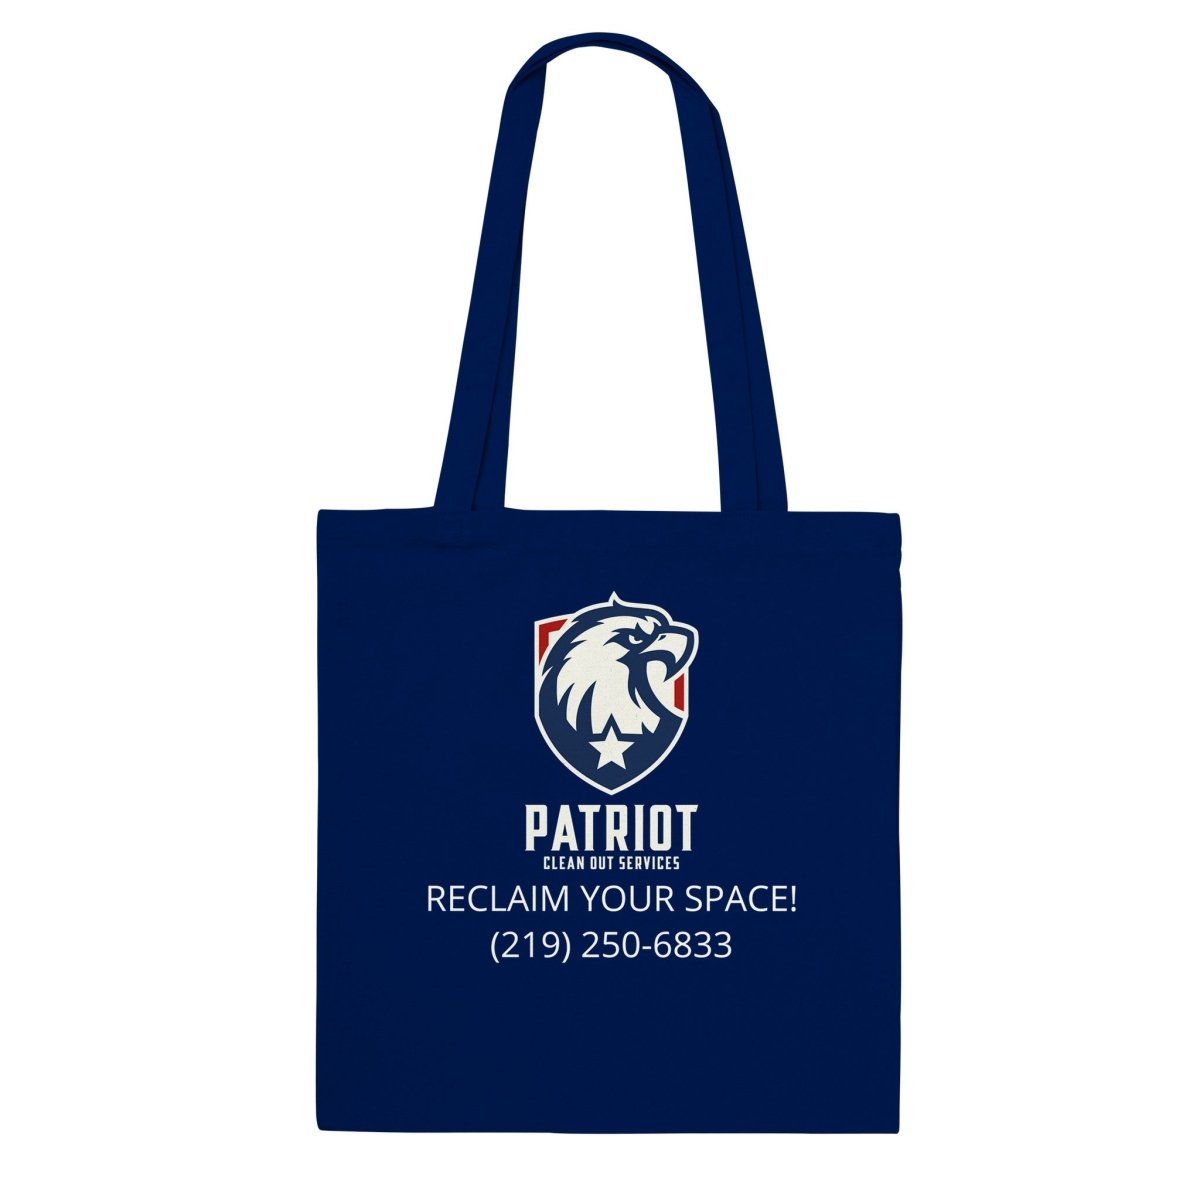 Patriotic Tote Bag with Patriot Clean Out Logo and long handles - Print Material - Navy